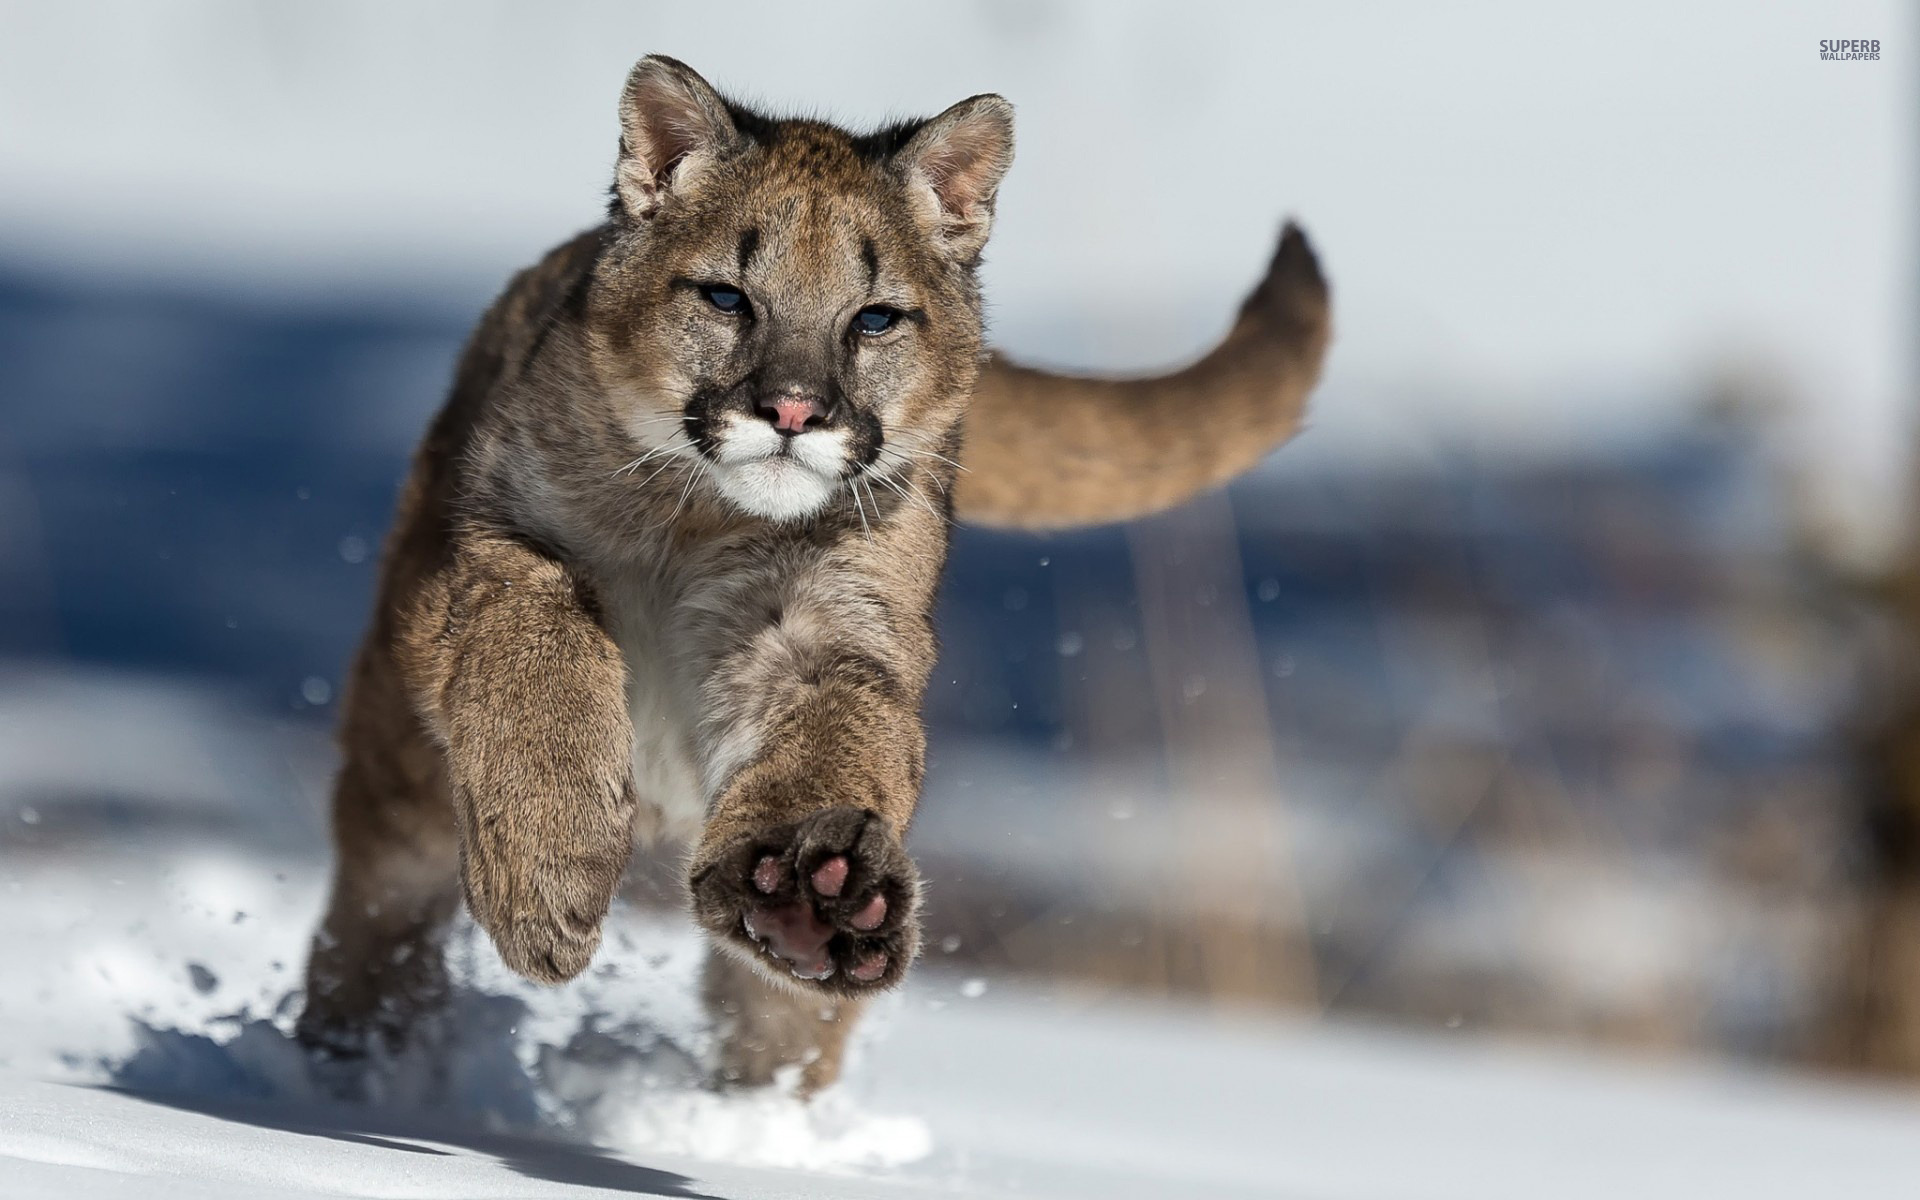 Cougar running in the snow wallpaper - Animal wallpapers -